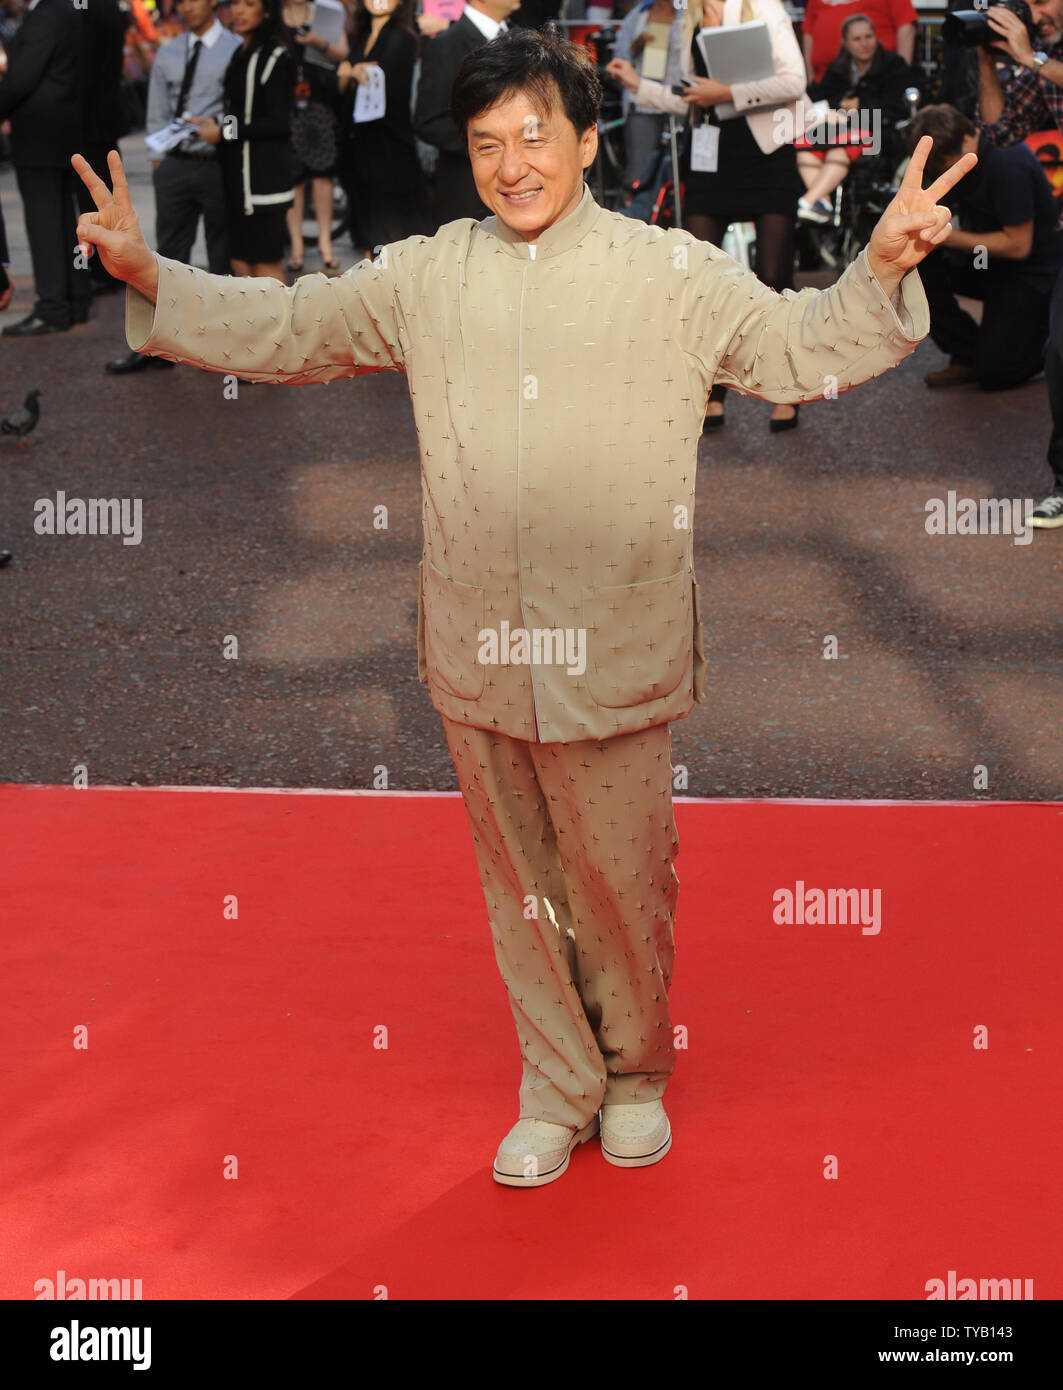 Hong Kong actor Jackie Chan attends the premiere of 'The Karate Kid' at Odeon, Leicester Square in London on July 15, 2010.     UPI/Rune Hellestad Stock Photo